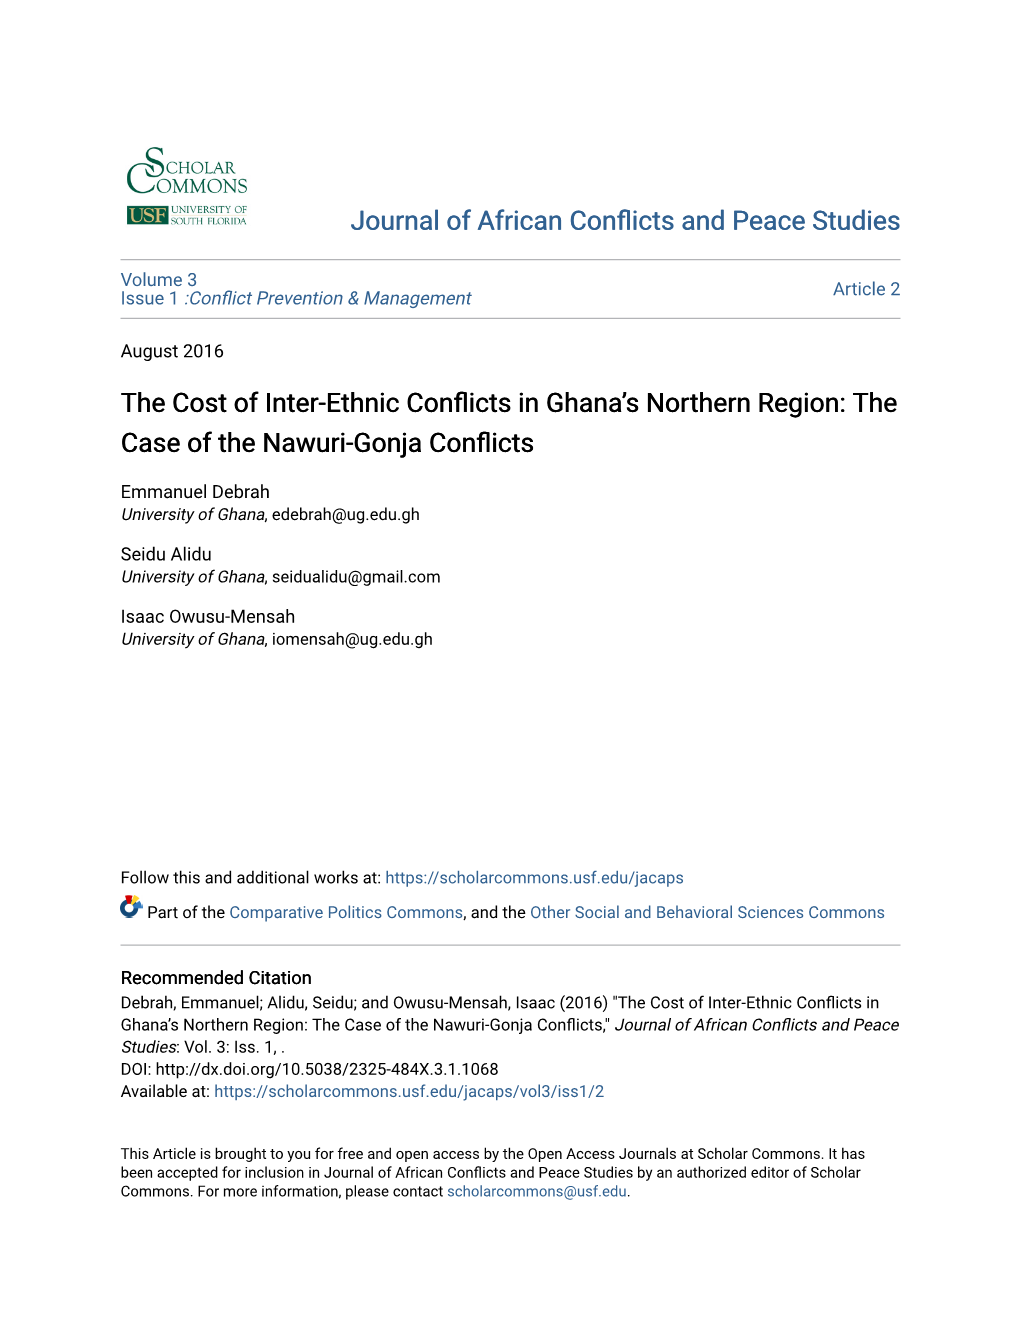 The Cost of Inter-Ethnic Conflicts in Ghana’S Northern Region: the Case of the Nawuri-Gonja Conflicts